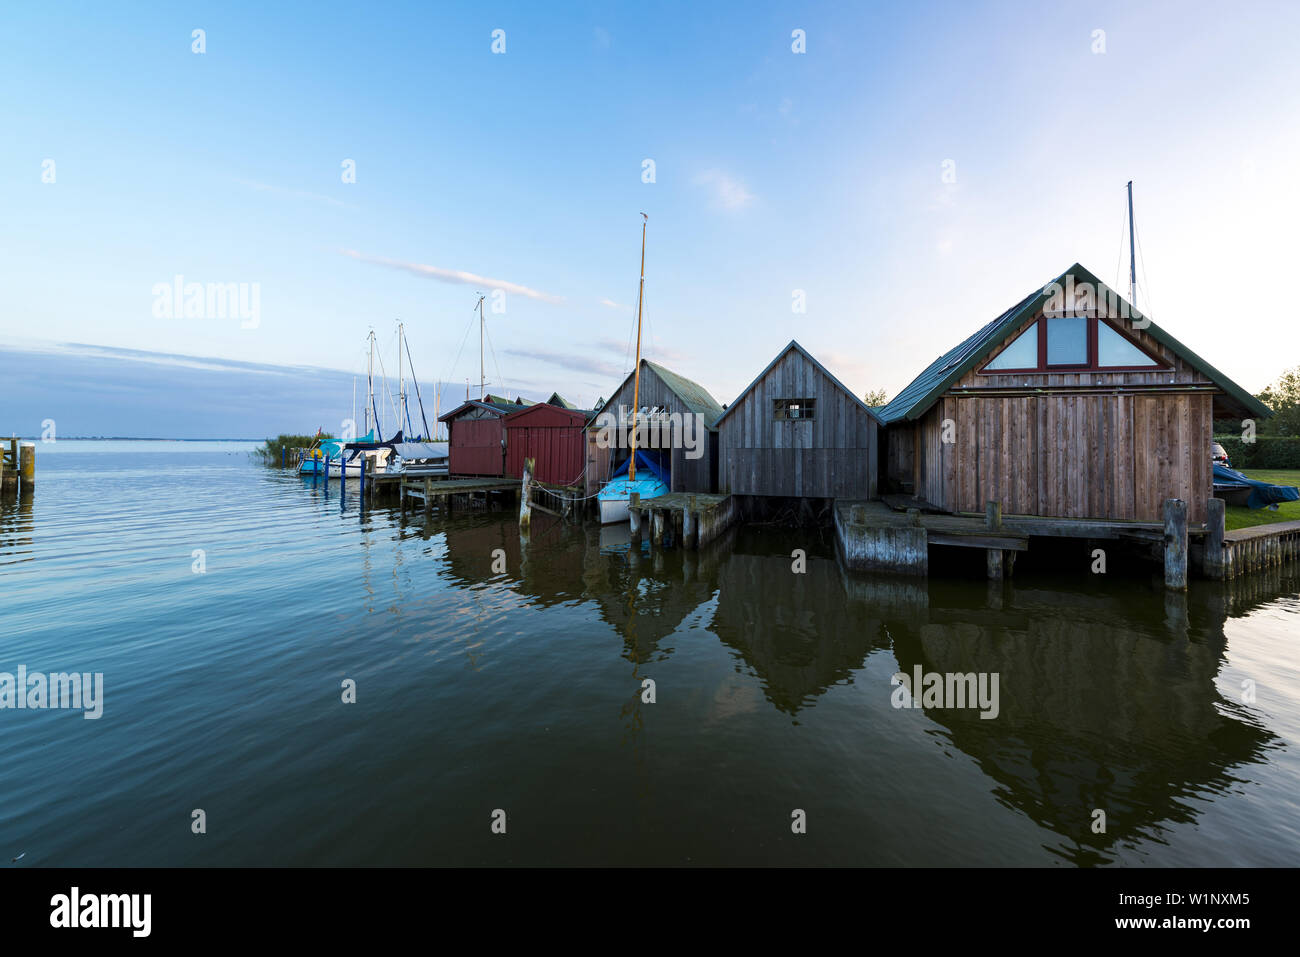 Boathouses in the Evening Mood at the port Althagen in Ahrenshoop by the Bodden at the Darß. Althagen, Ahrenshoop, Darß, Mecklenburg-Vorpommern, Germa Stock Photo